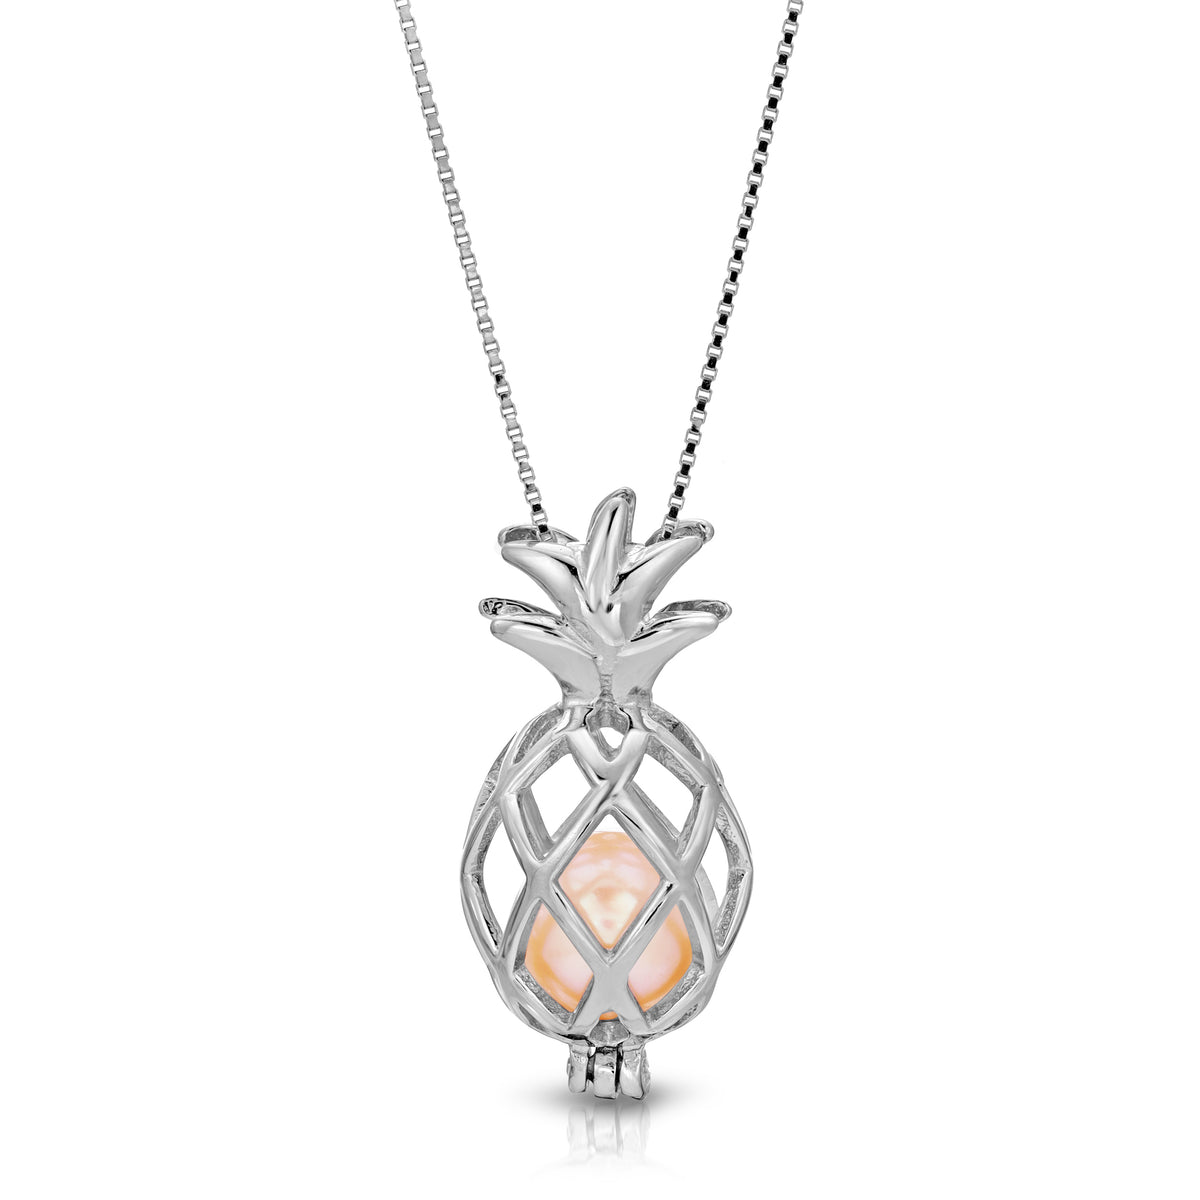 Sterling Silver Pearl Pineapple Cage Pendant - Pineapple Design Pearl Cage Pendant